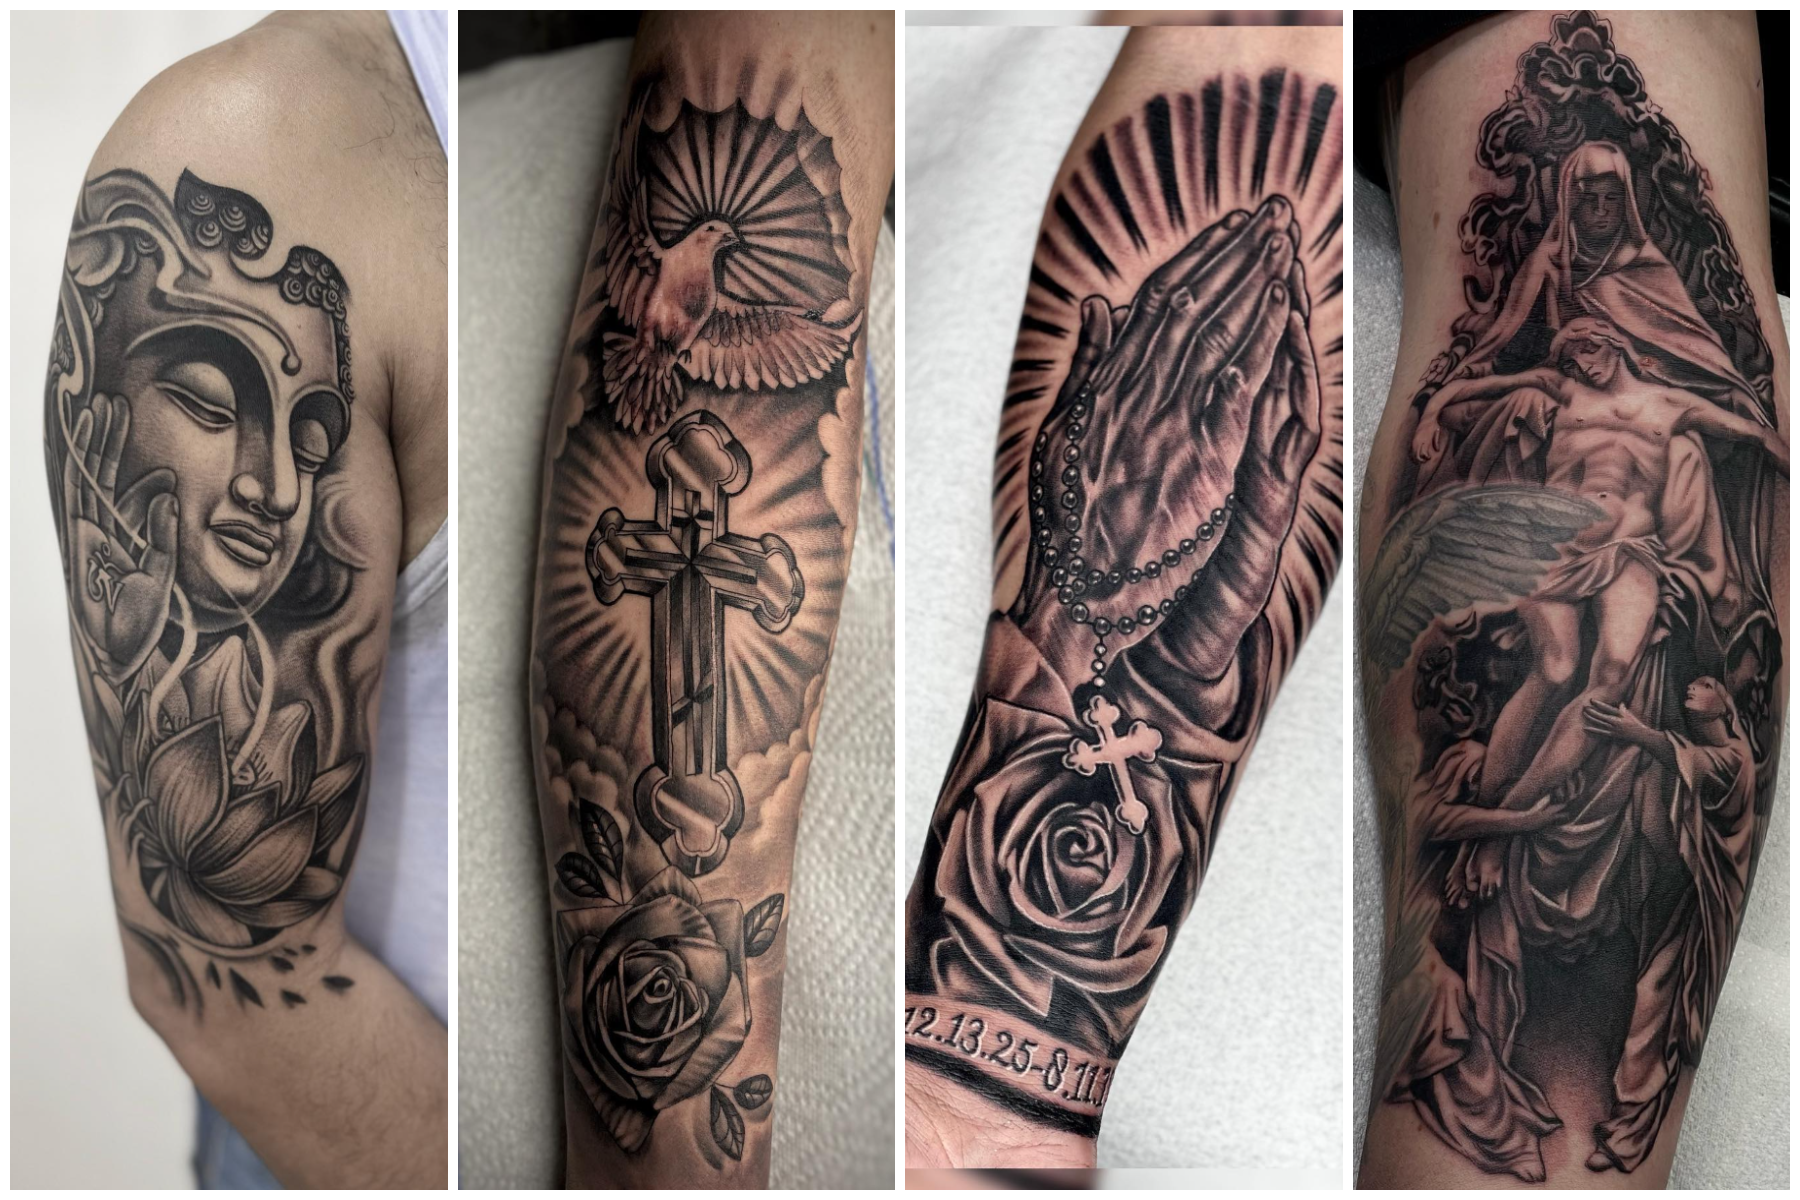 20 of the best religious tattoos for men that will make you look cool